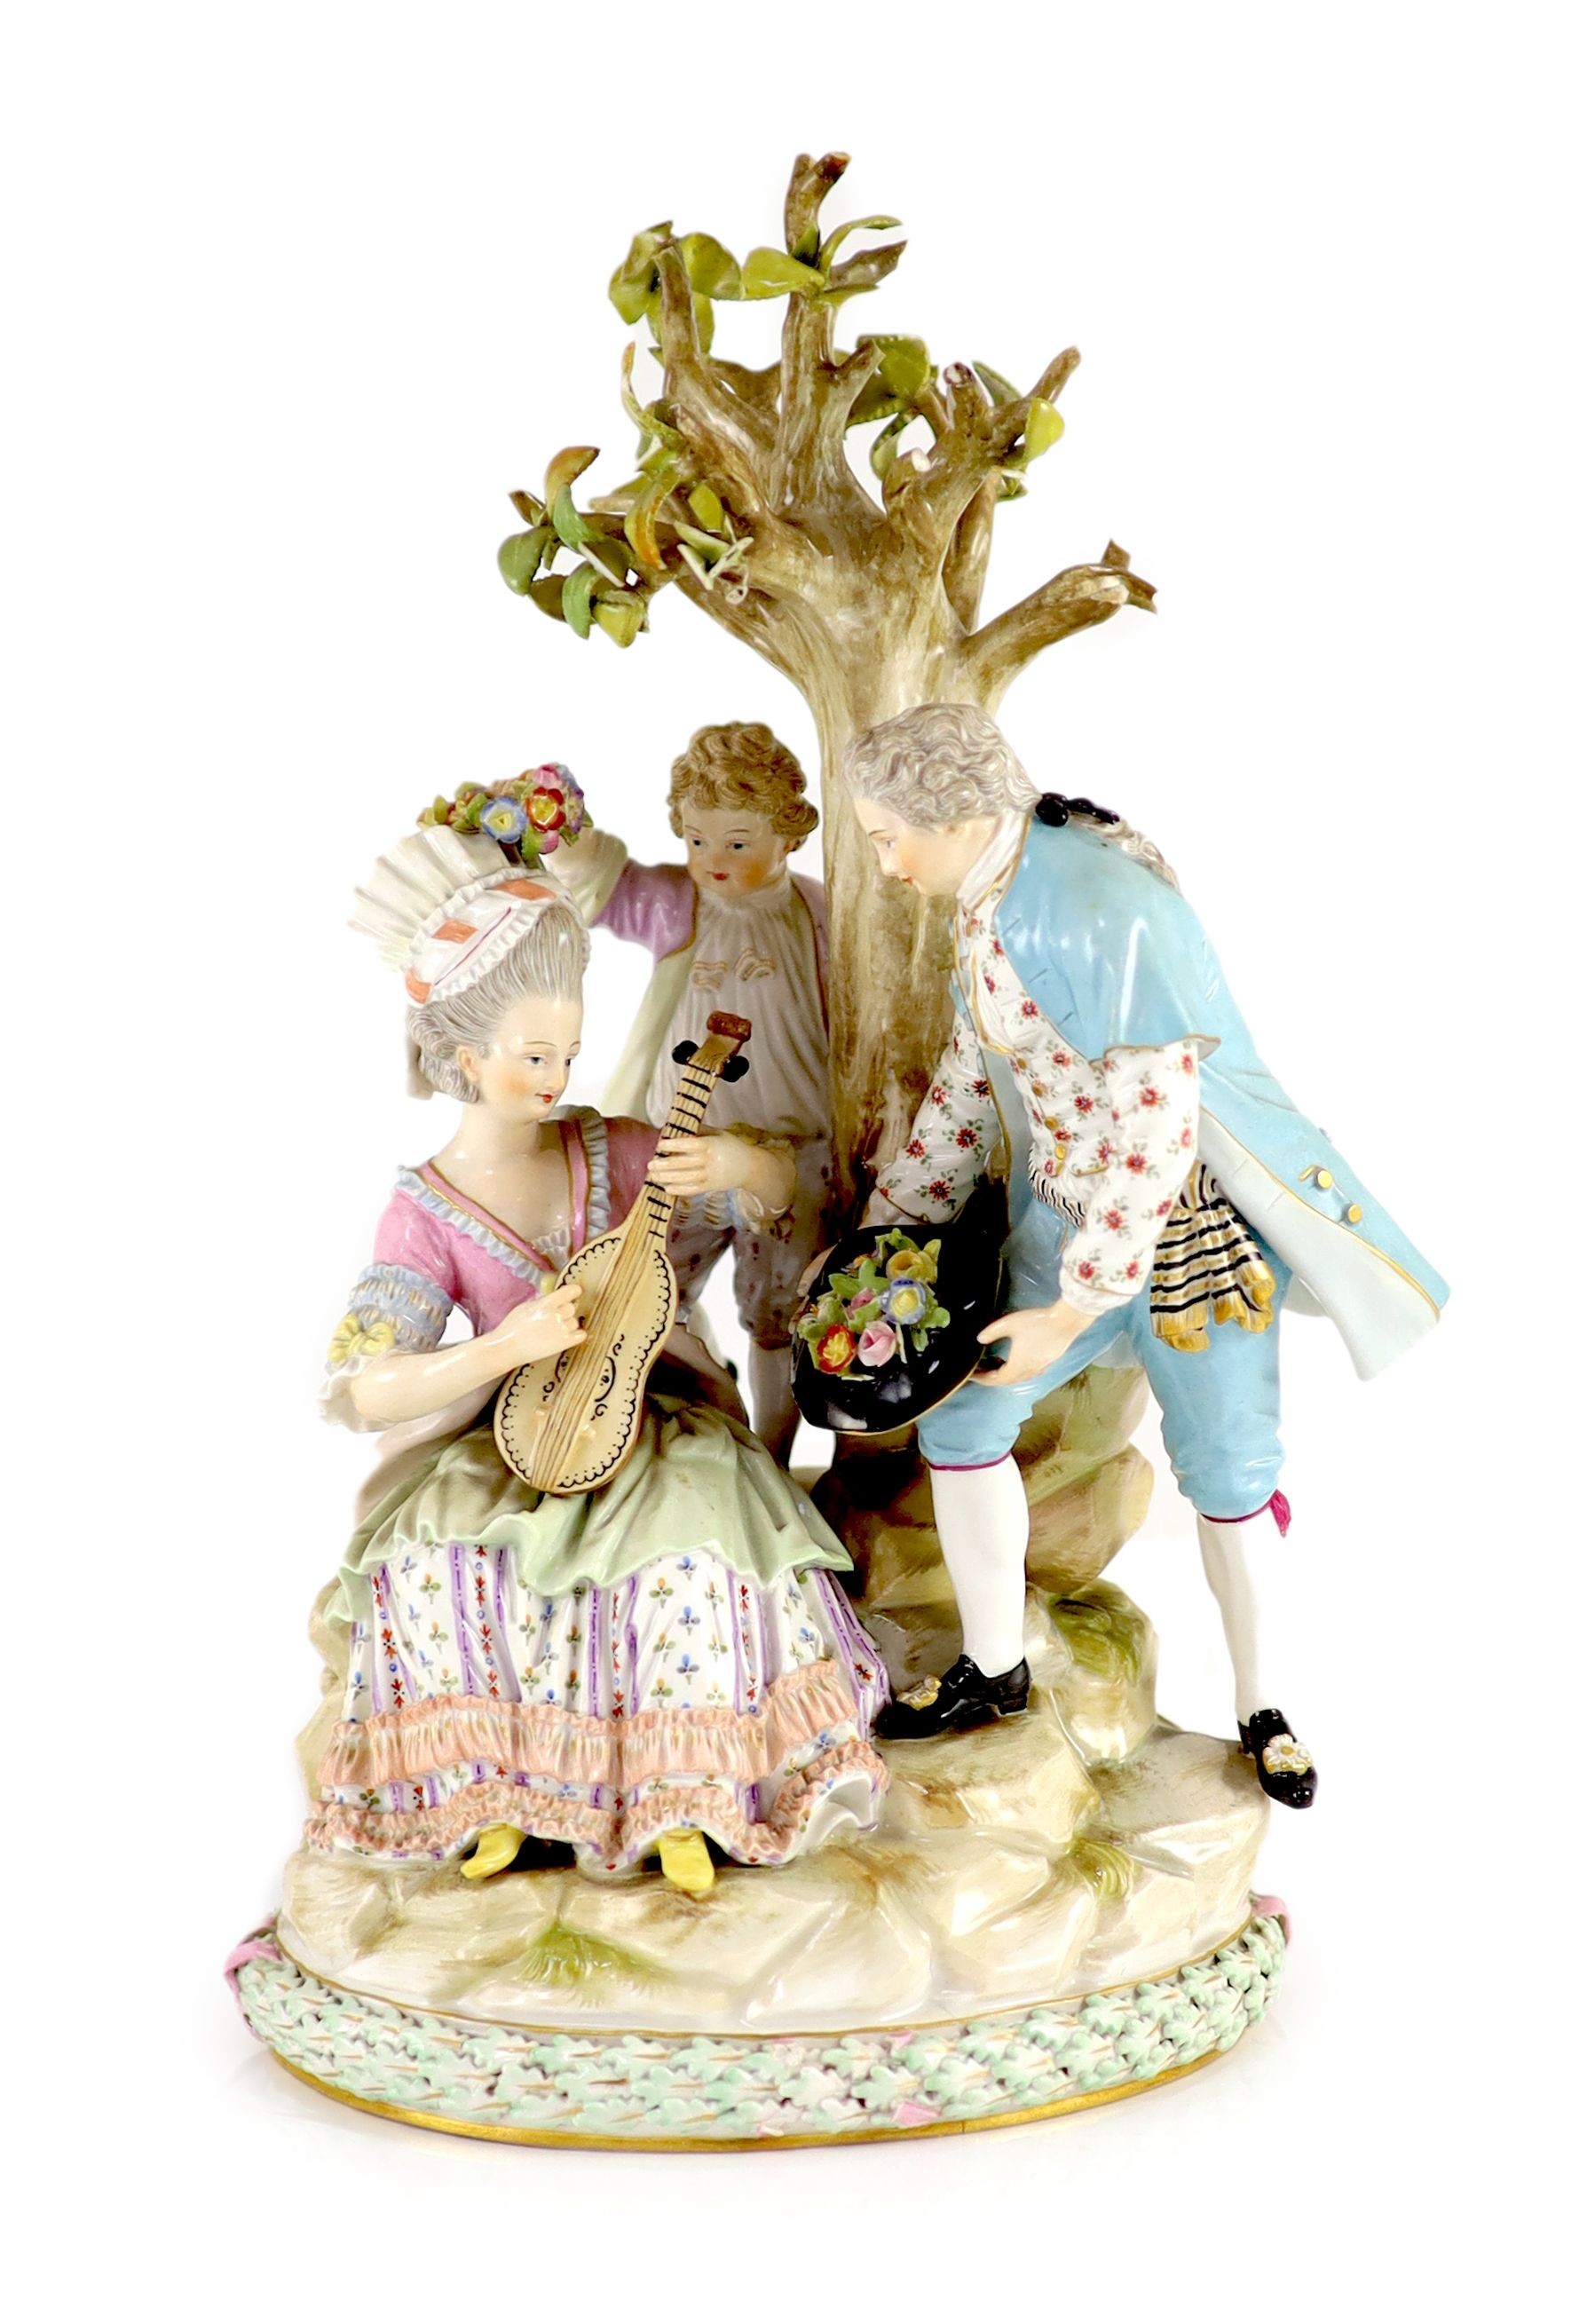 A Meissen group of flower pickers, 19th century, 26 cm high, losses to tree